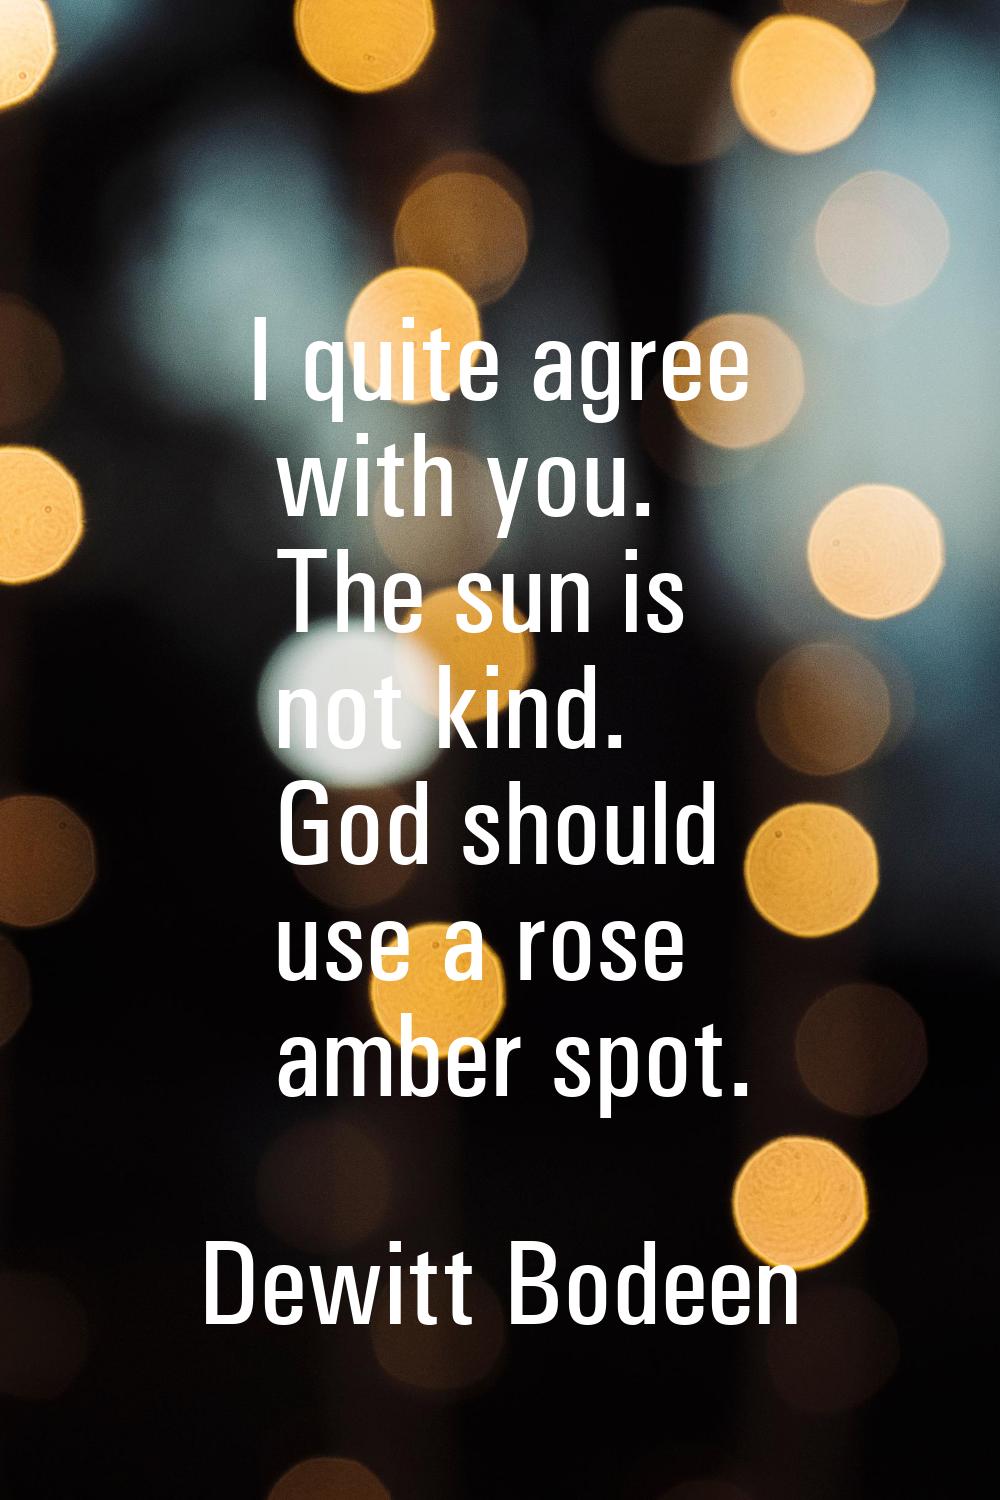 I quite agree with you. The sun is not kind. God should use a rose amber spot.